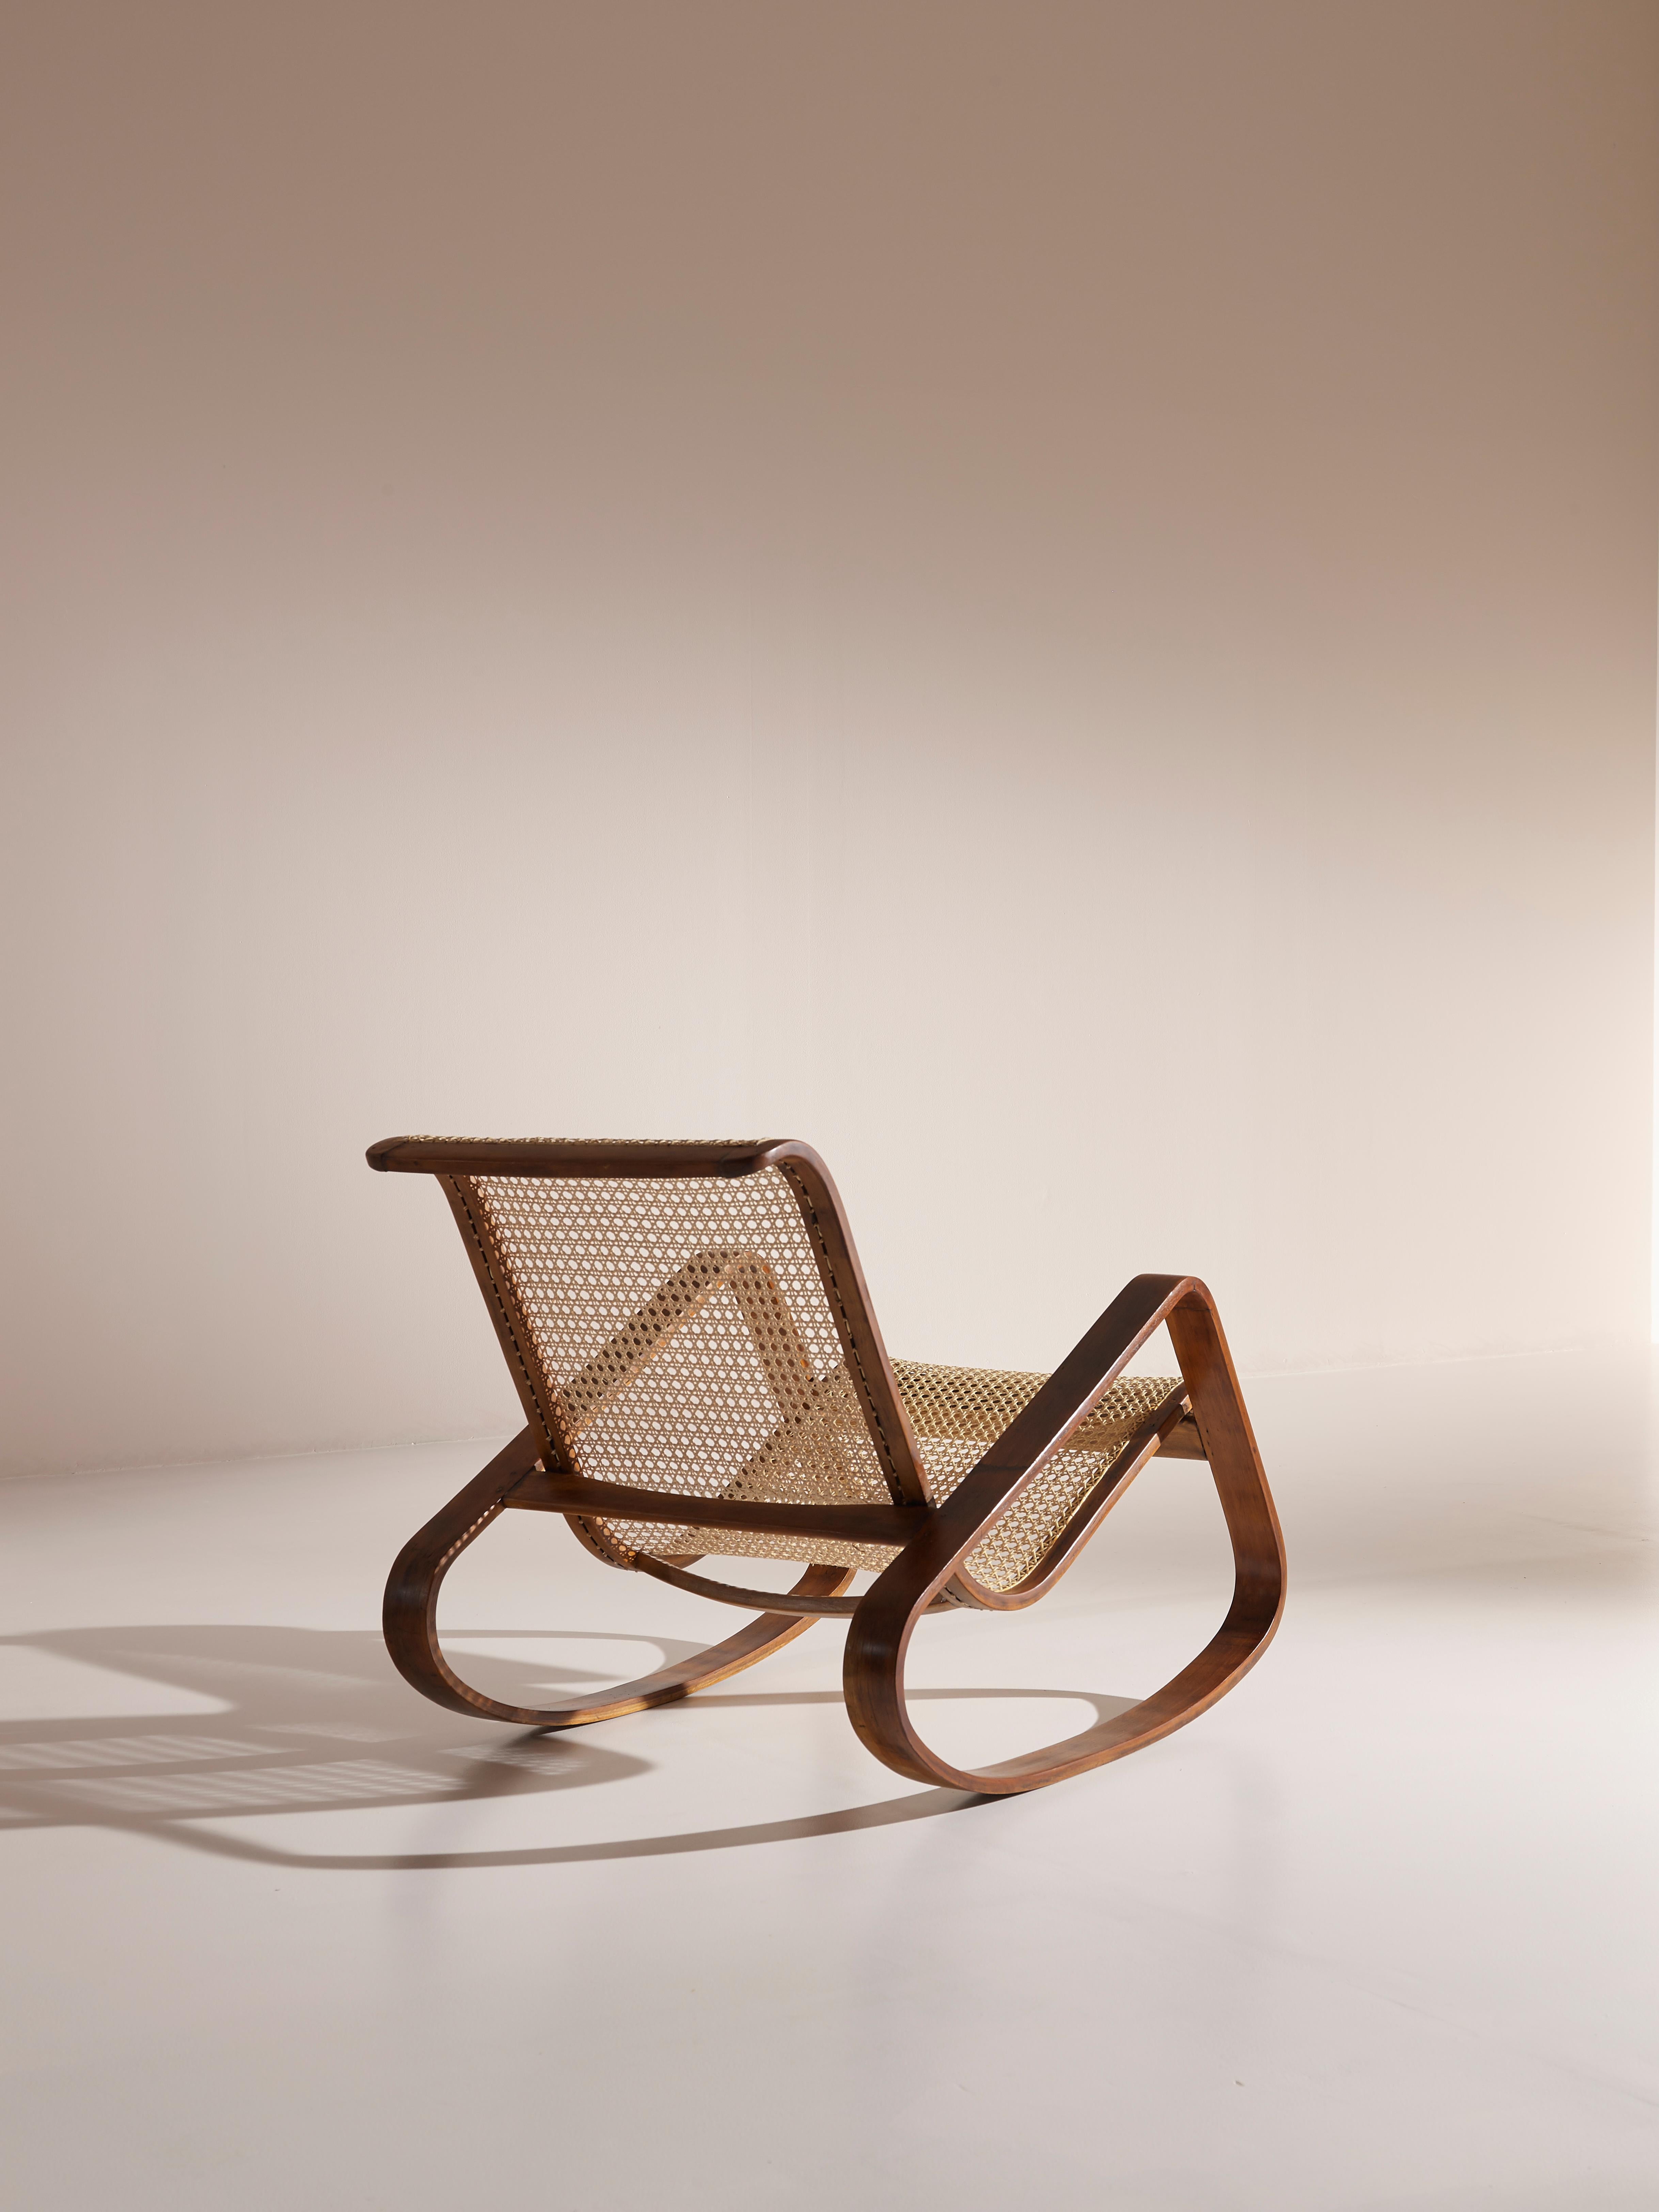 An exceptional and very rare rocking chair designed and produced by Ditta Porino (Torino - Italy) in the 1930s.

The design of this piece is simply stunning in its simplicity. A single piece caned seat lays with lightness on two organically shaped